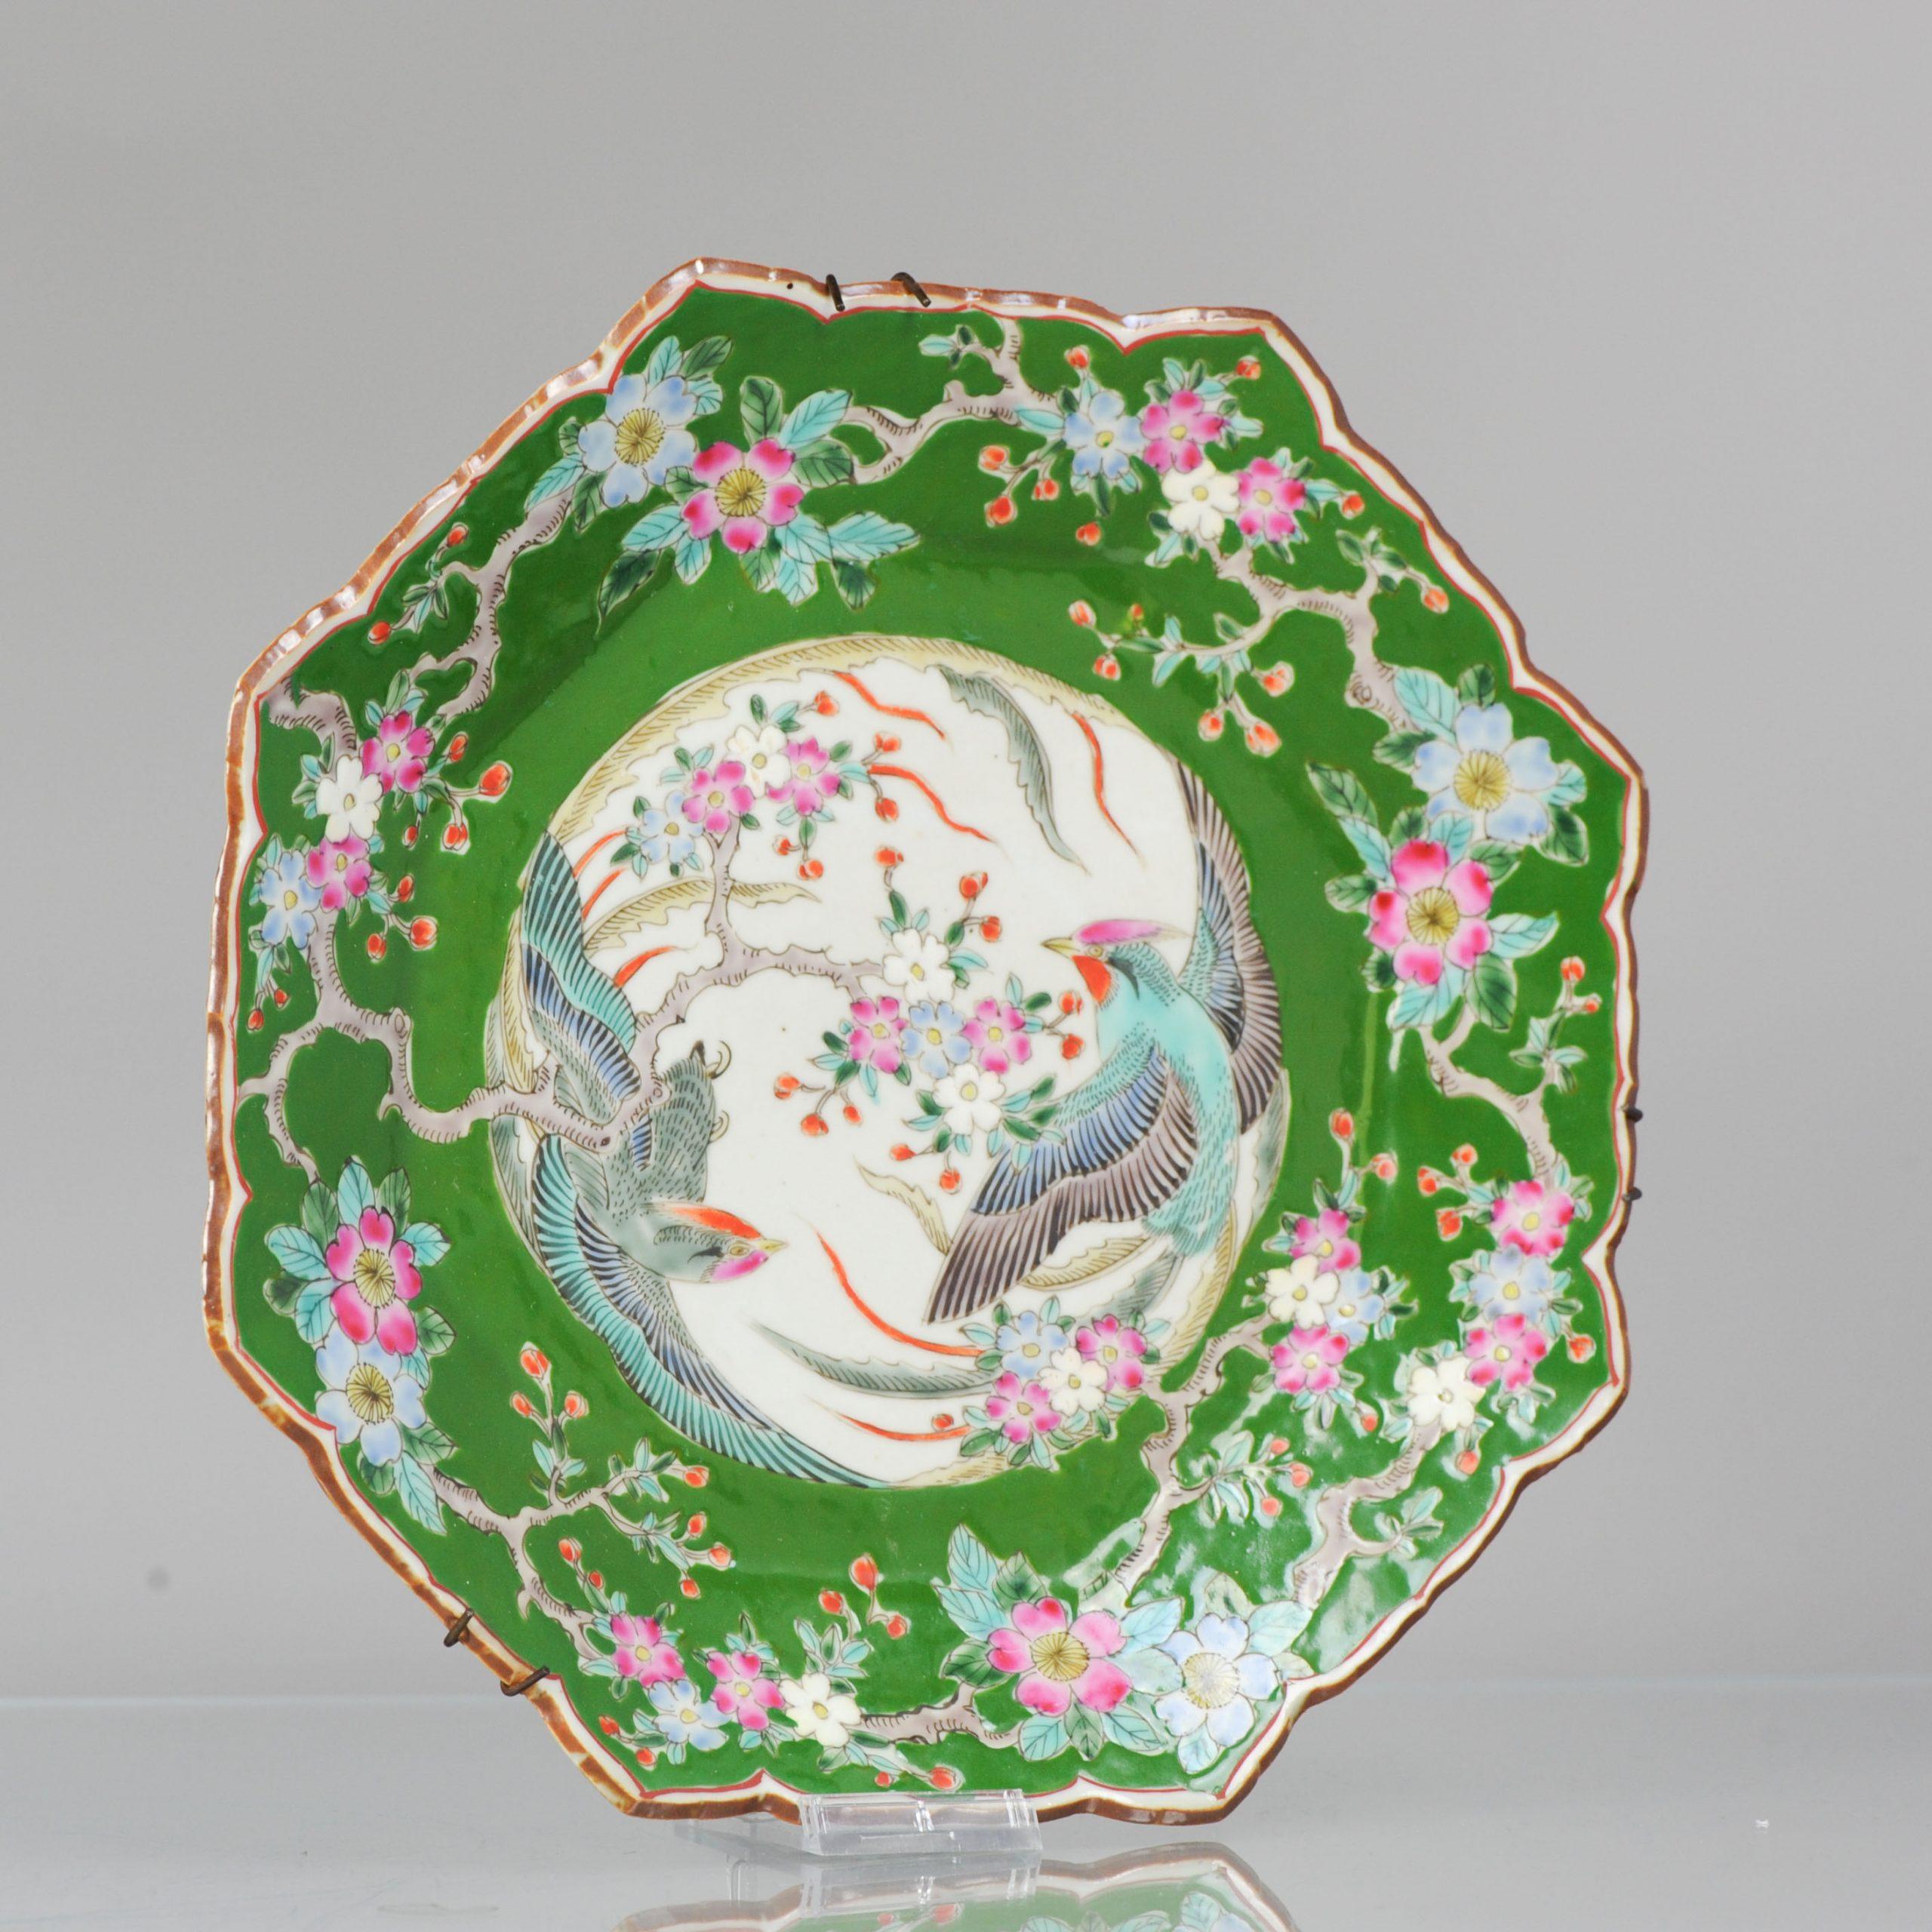 Antique Japanese Meiji Yamatoku Porcelain Colorfull Enamels Birds Plate In Good Condition For Sale In Amsterdam, Noord Holland